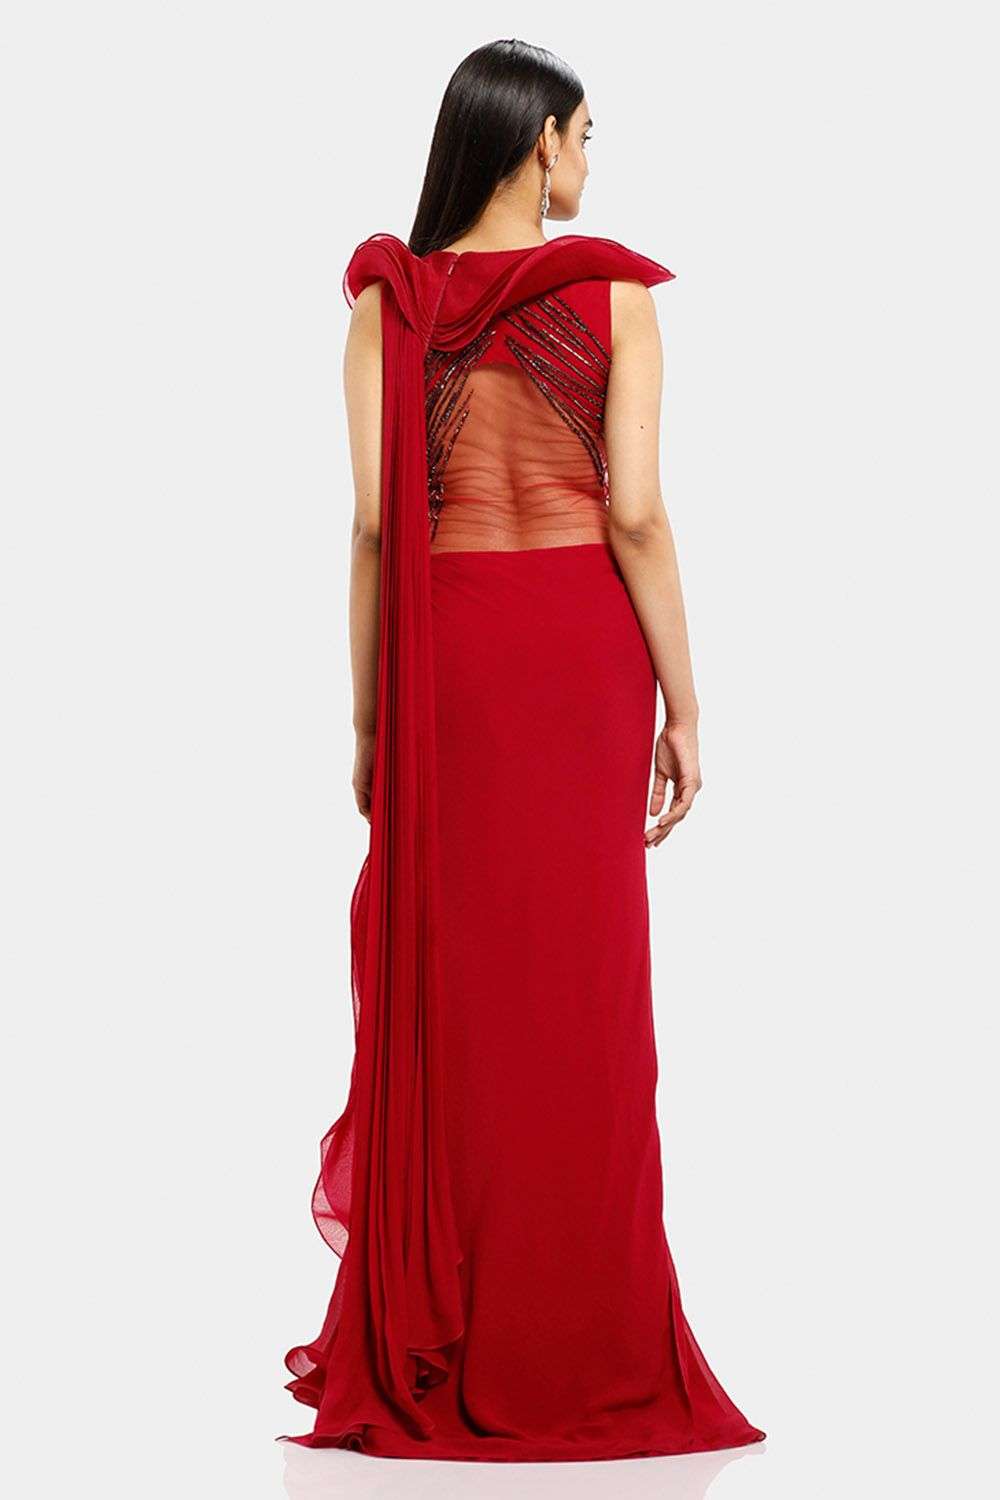 Hand Embroidered Georgette Saree Style Gown in Red and Mustard : TJW1870